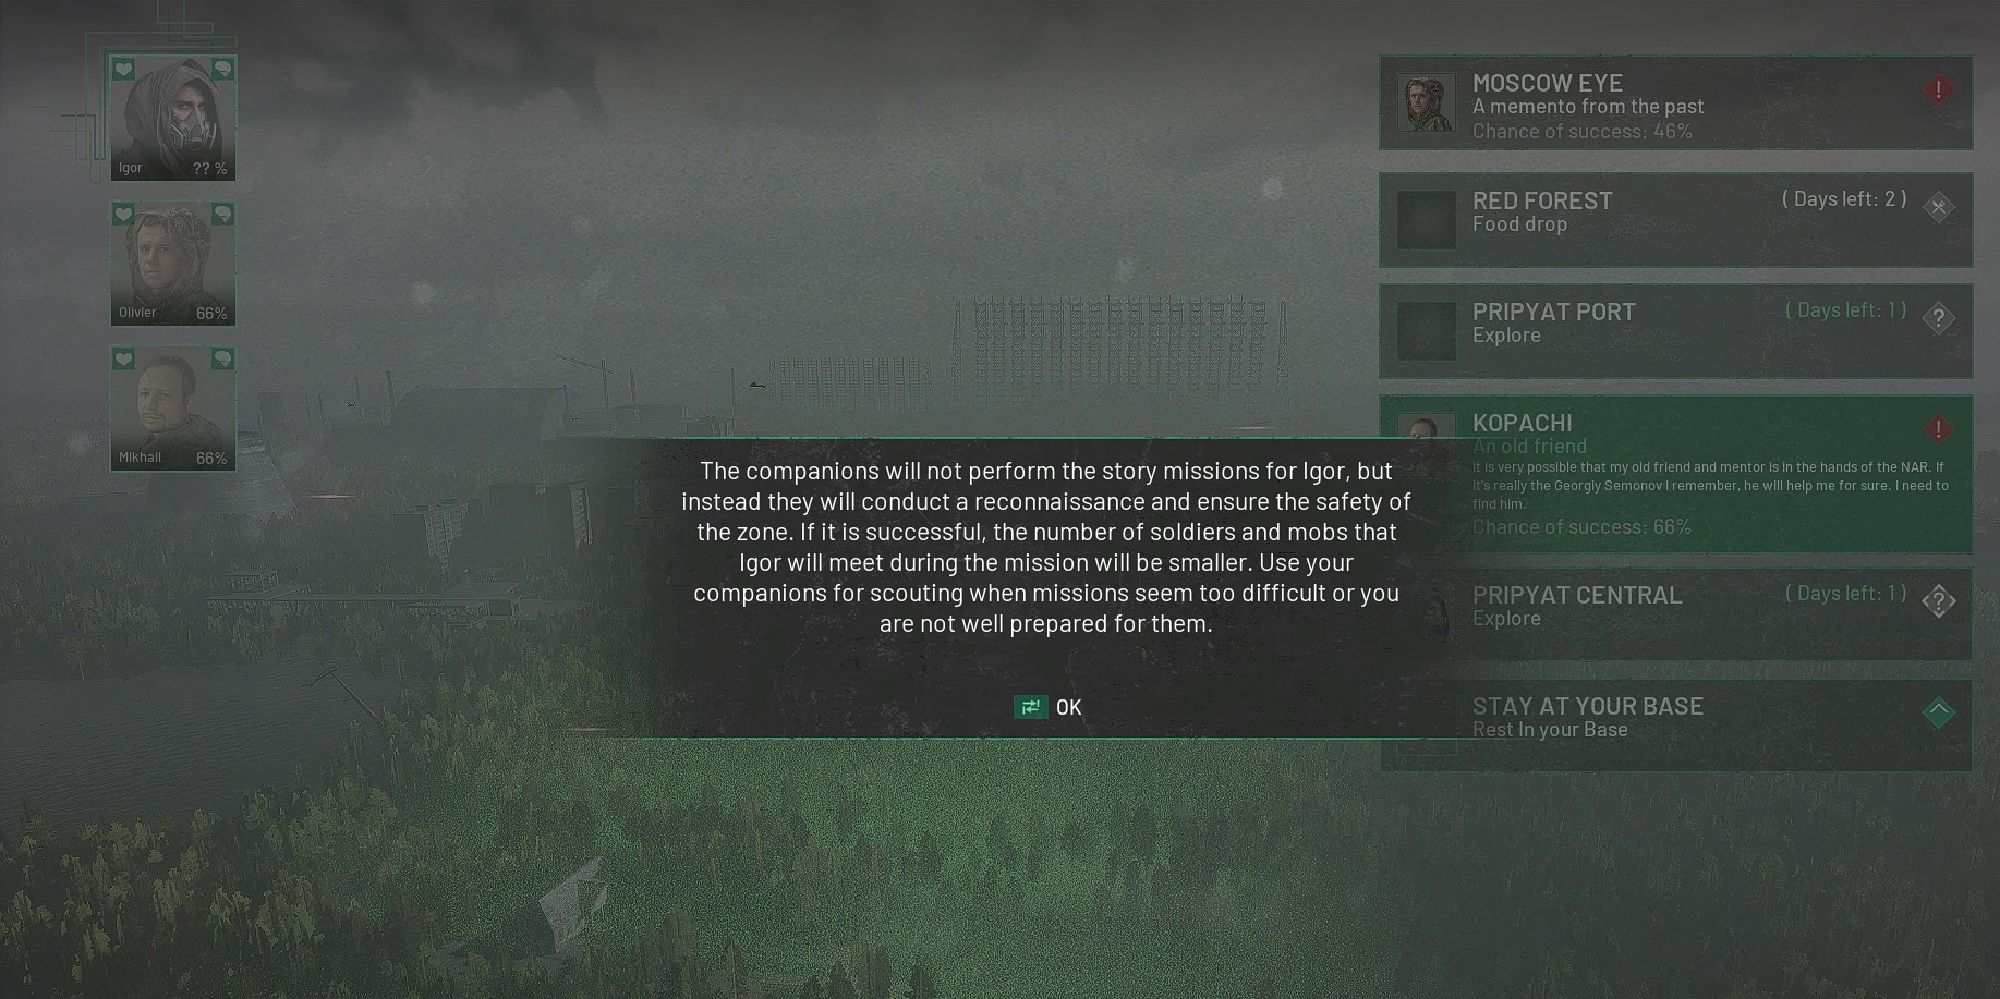 Chernobylite - Warning Pop-Up When Attempting To Send Ally On Story Mission